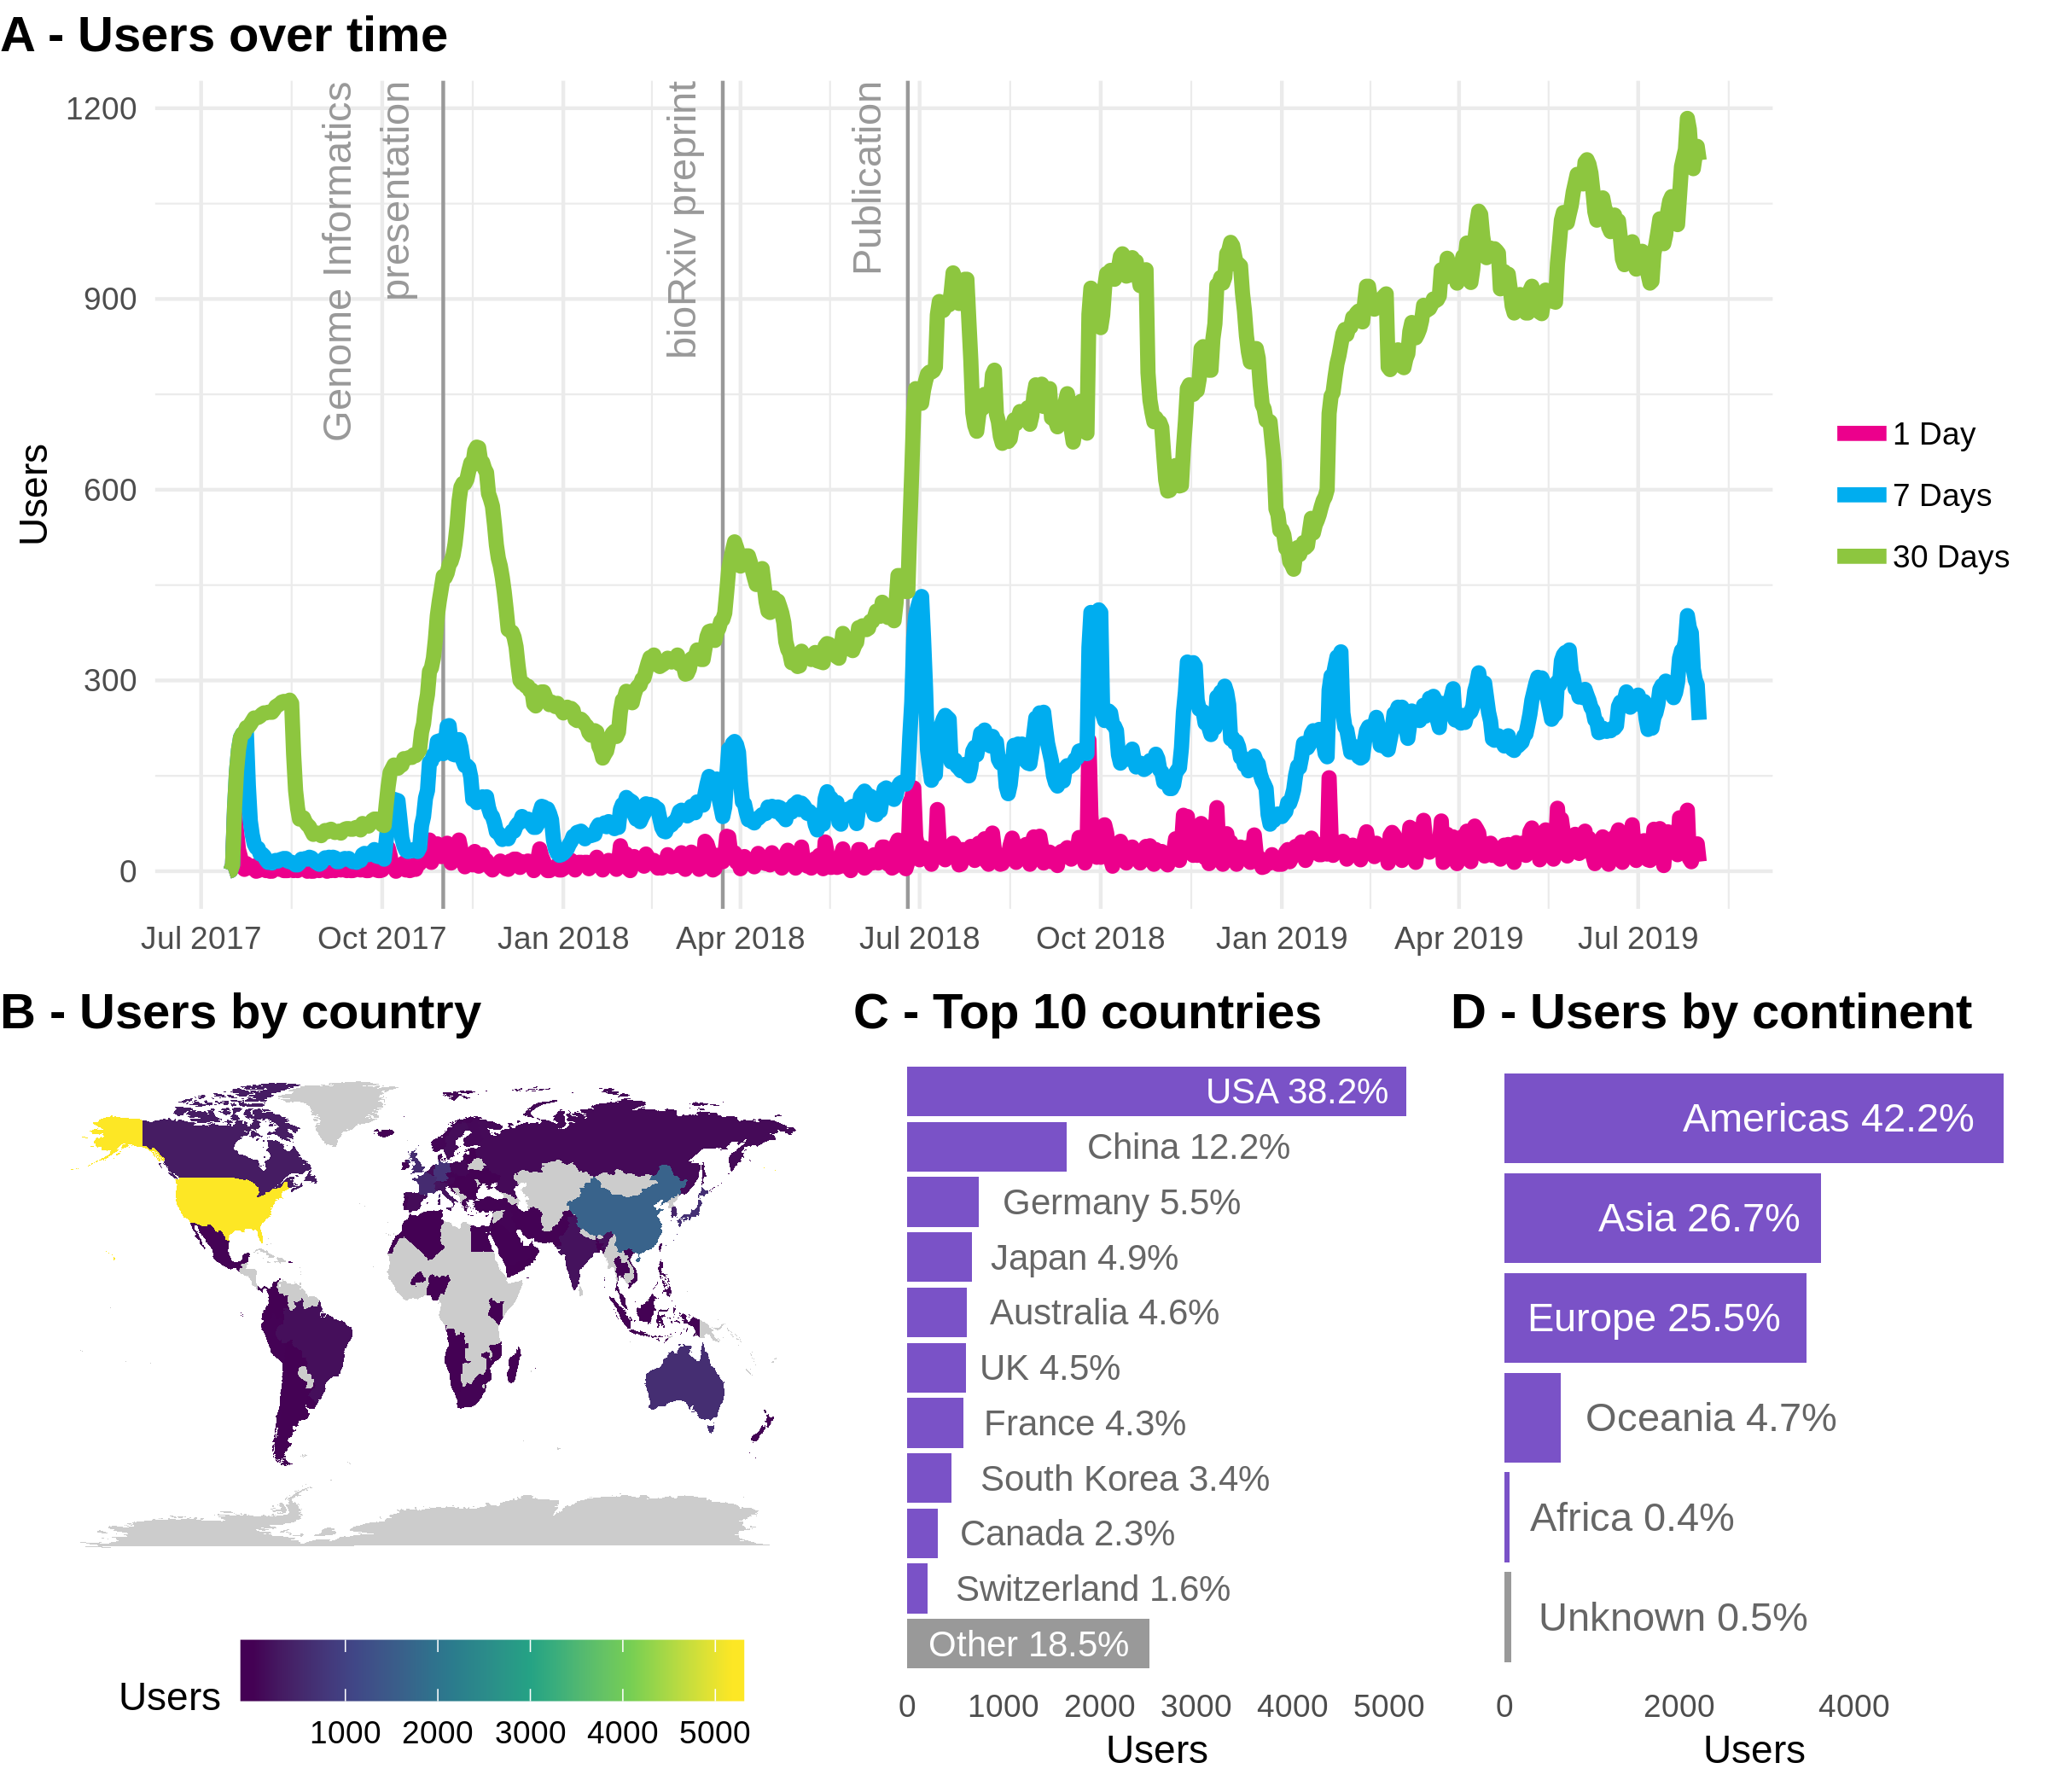 Usage of the scRNA-tools website. (A) Usage over time showing the number of users per day (pink), week (blue) or 30 days (green). Labelled vertical lines indicate events that may have influenced traffic. (B) World map coloured according to number of users from low (blue) to high (yellow). (C) Number of users from the top 10 most common countries. (D) Number of users by continent.